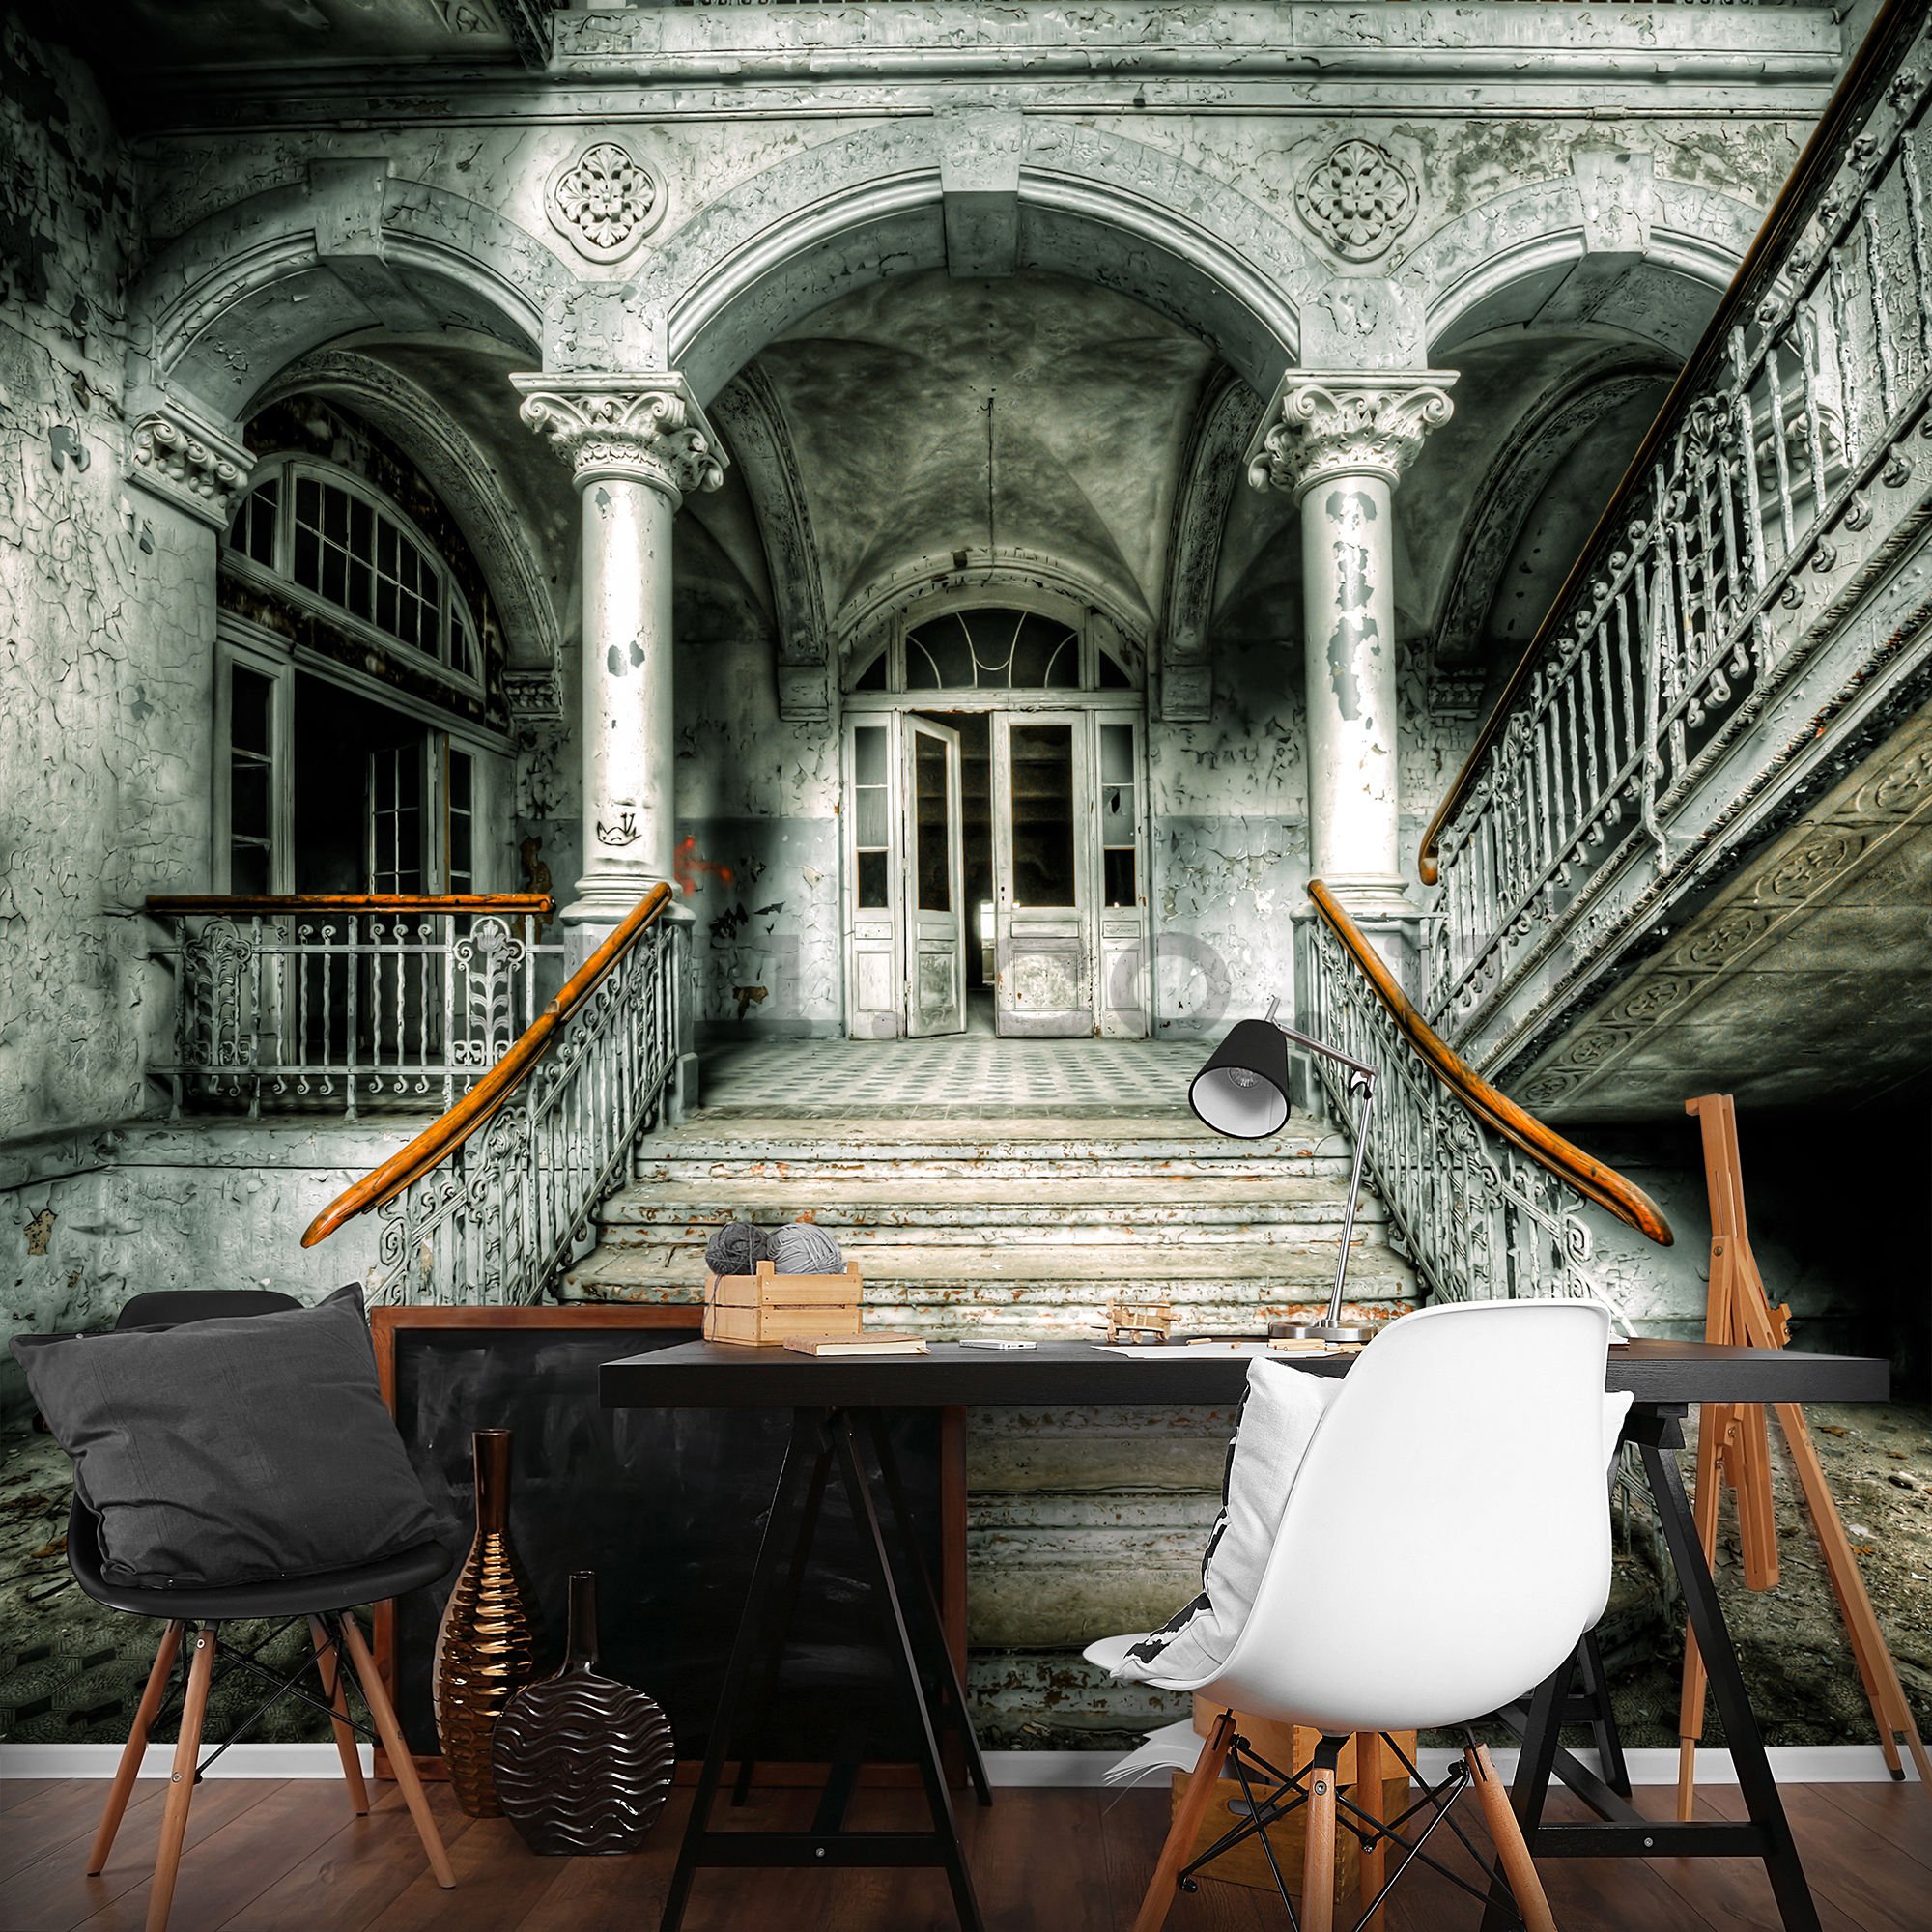 Wall mural: Stairs in front of the entrance - 184x254 cm